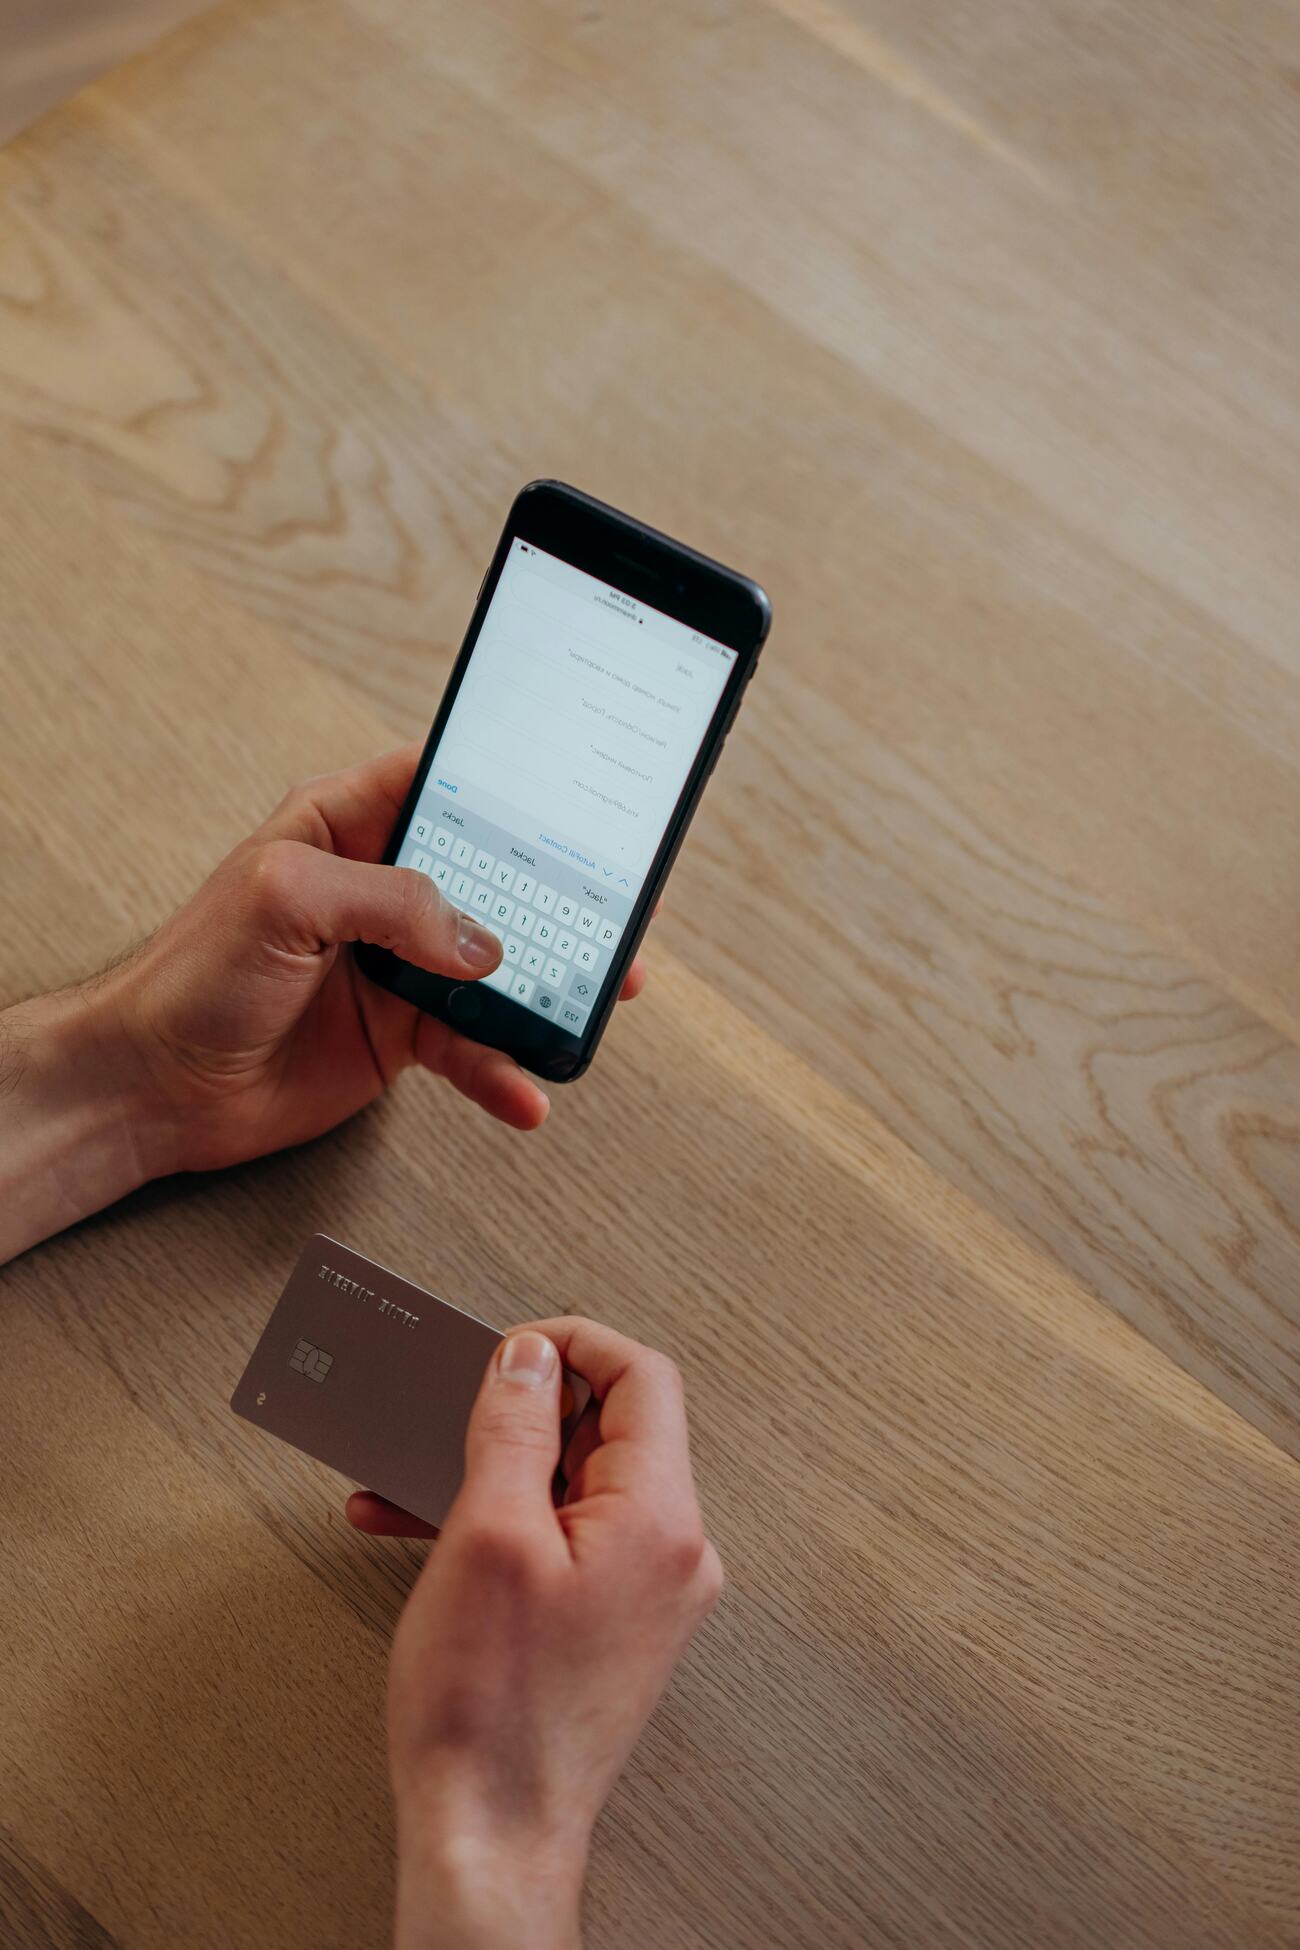 A person using a smartphone and holding a credit card